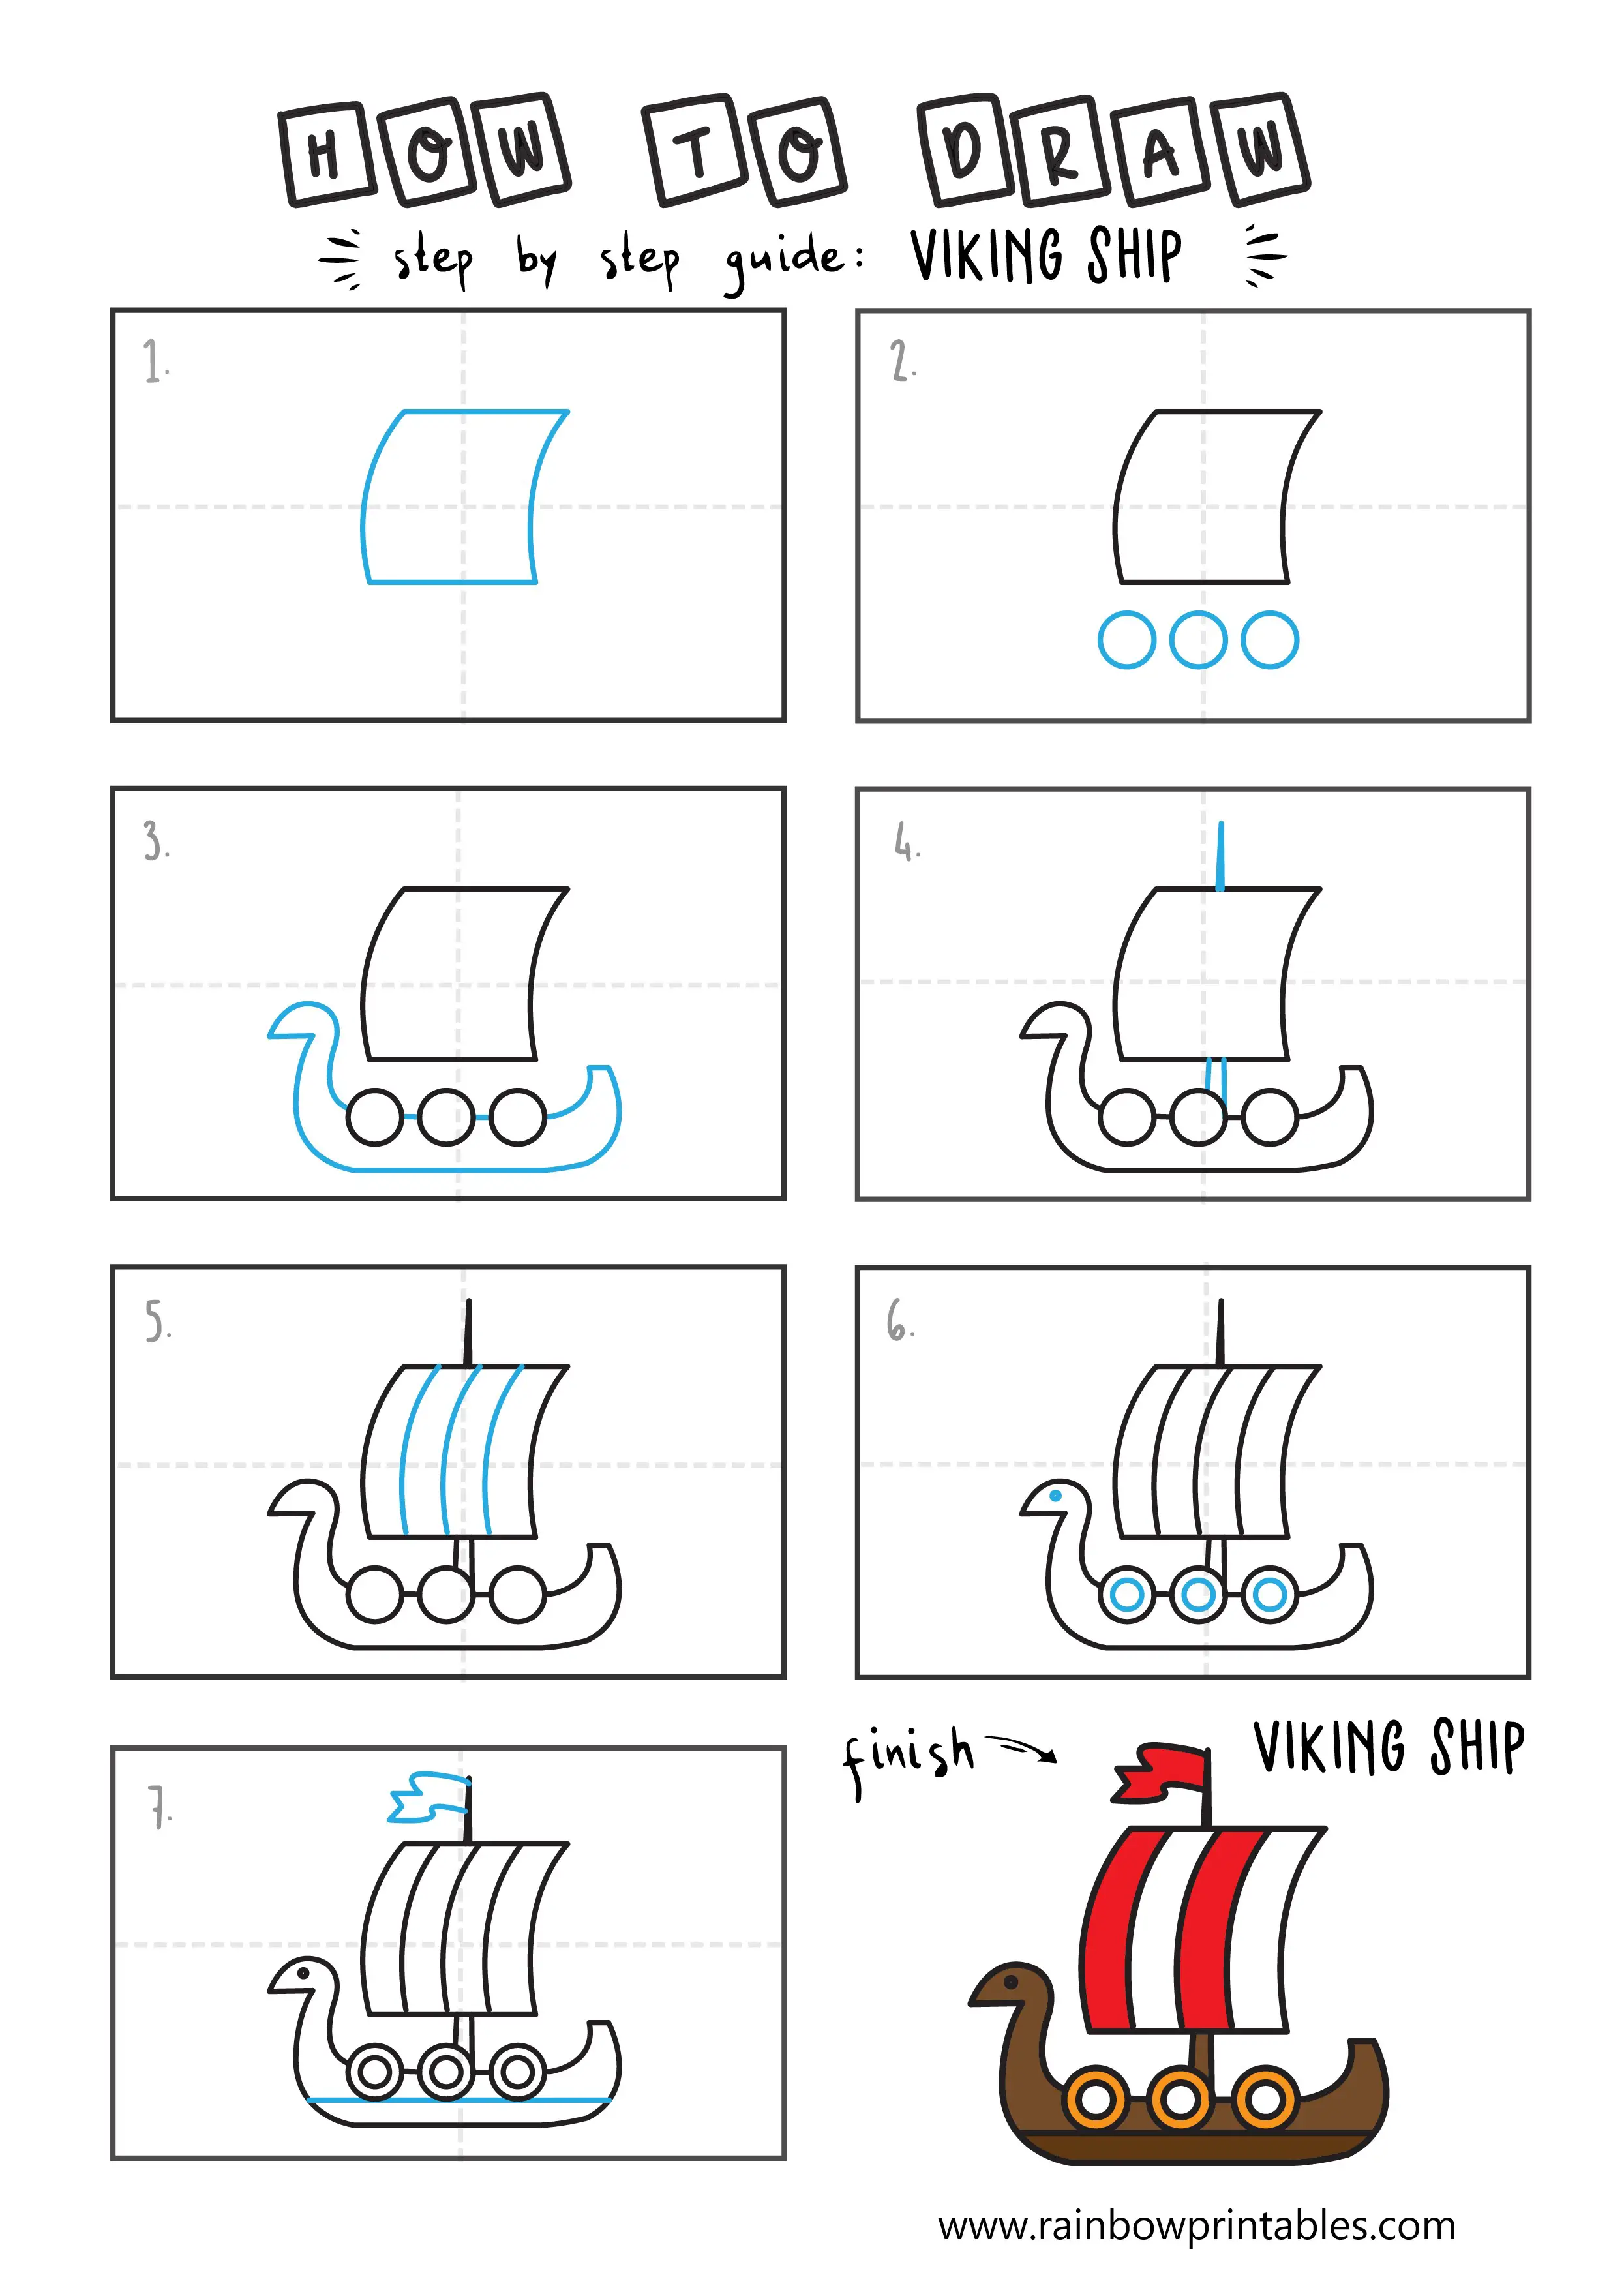 How To Draw A Viking Ship My How To Draw Images and Photos finder